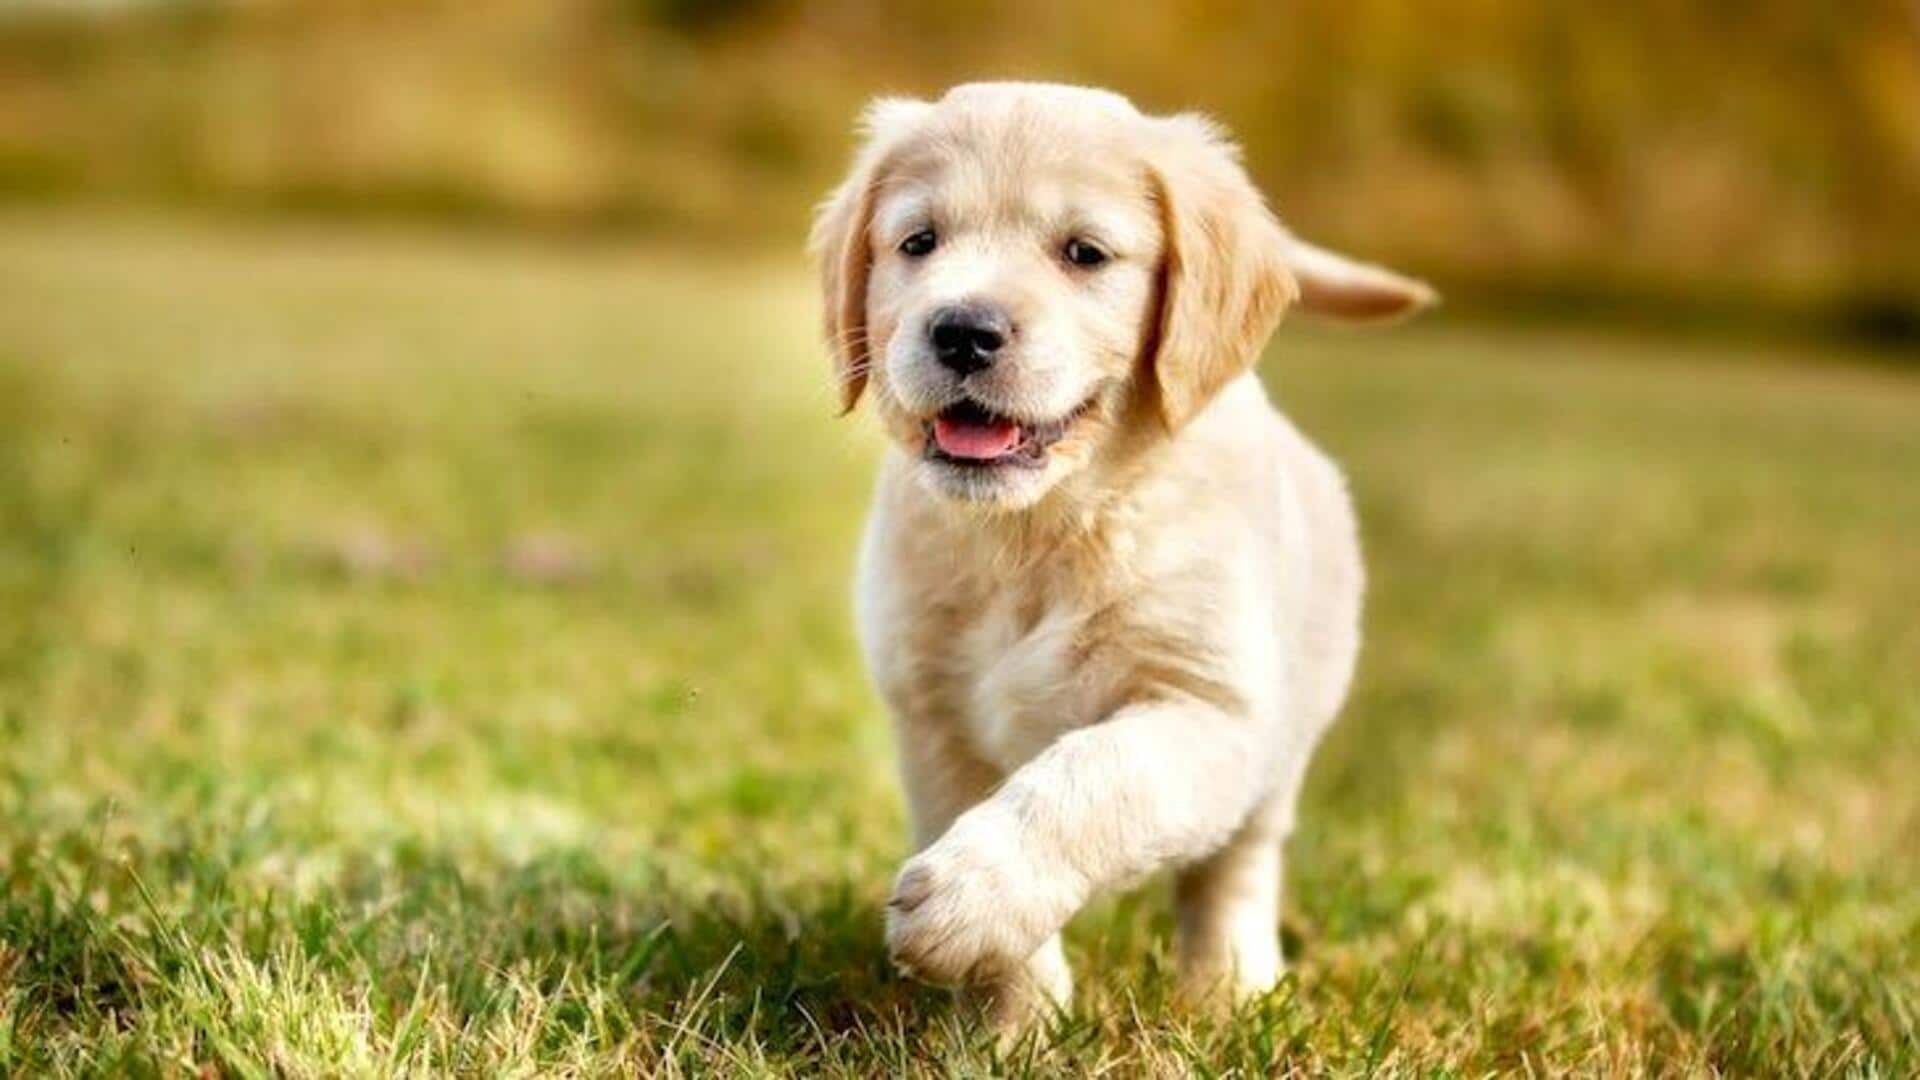 Golden Retriever homecare tips: Food, grooming, exercise, training, and more